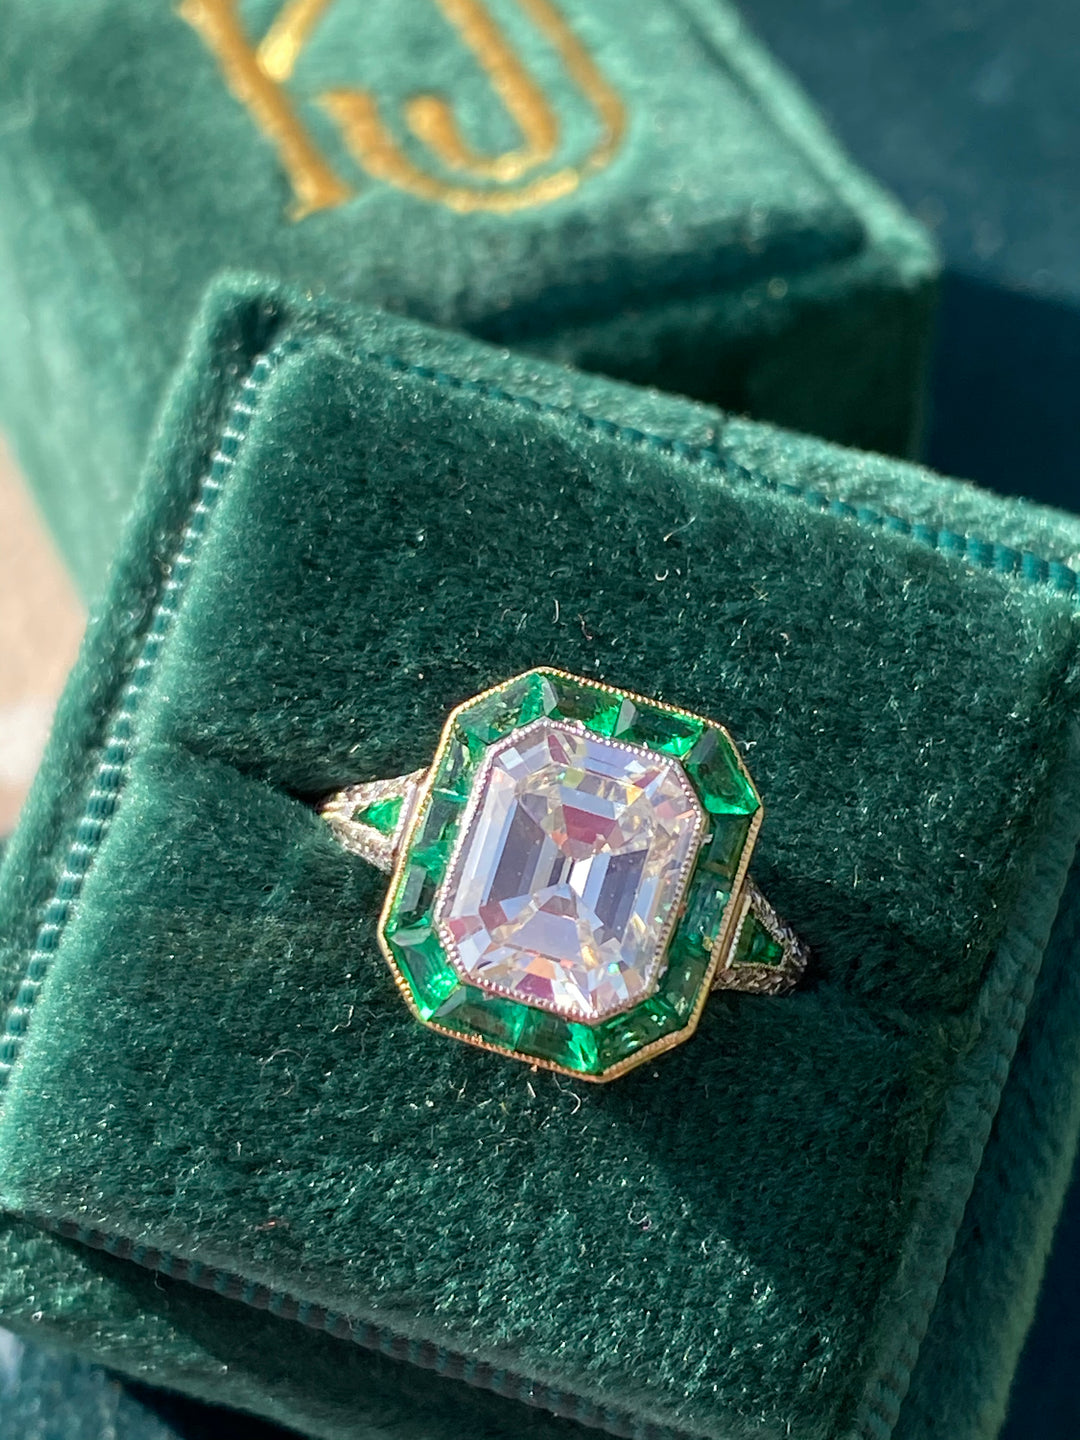 2.30 Carat Diamond and Emerald Antique Art Deco Halo Engagement Ring in 18ct White Gold